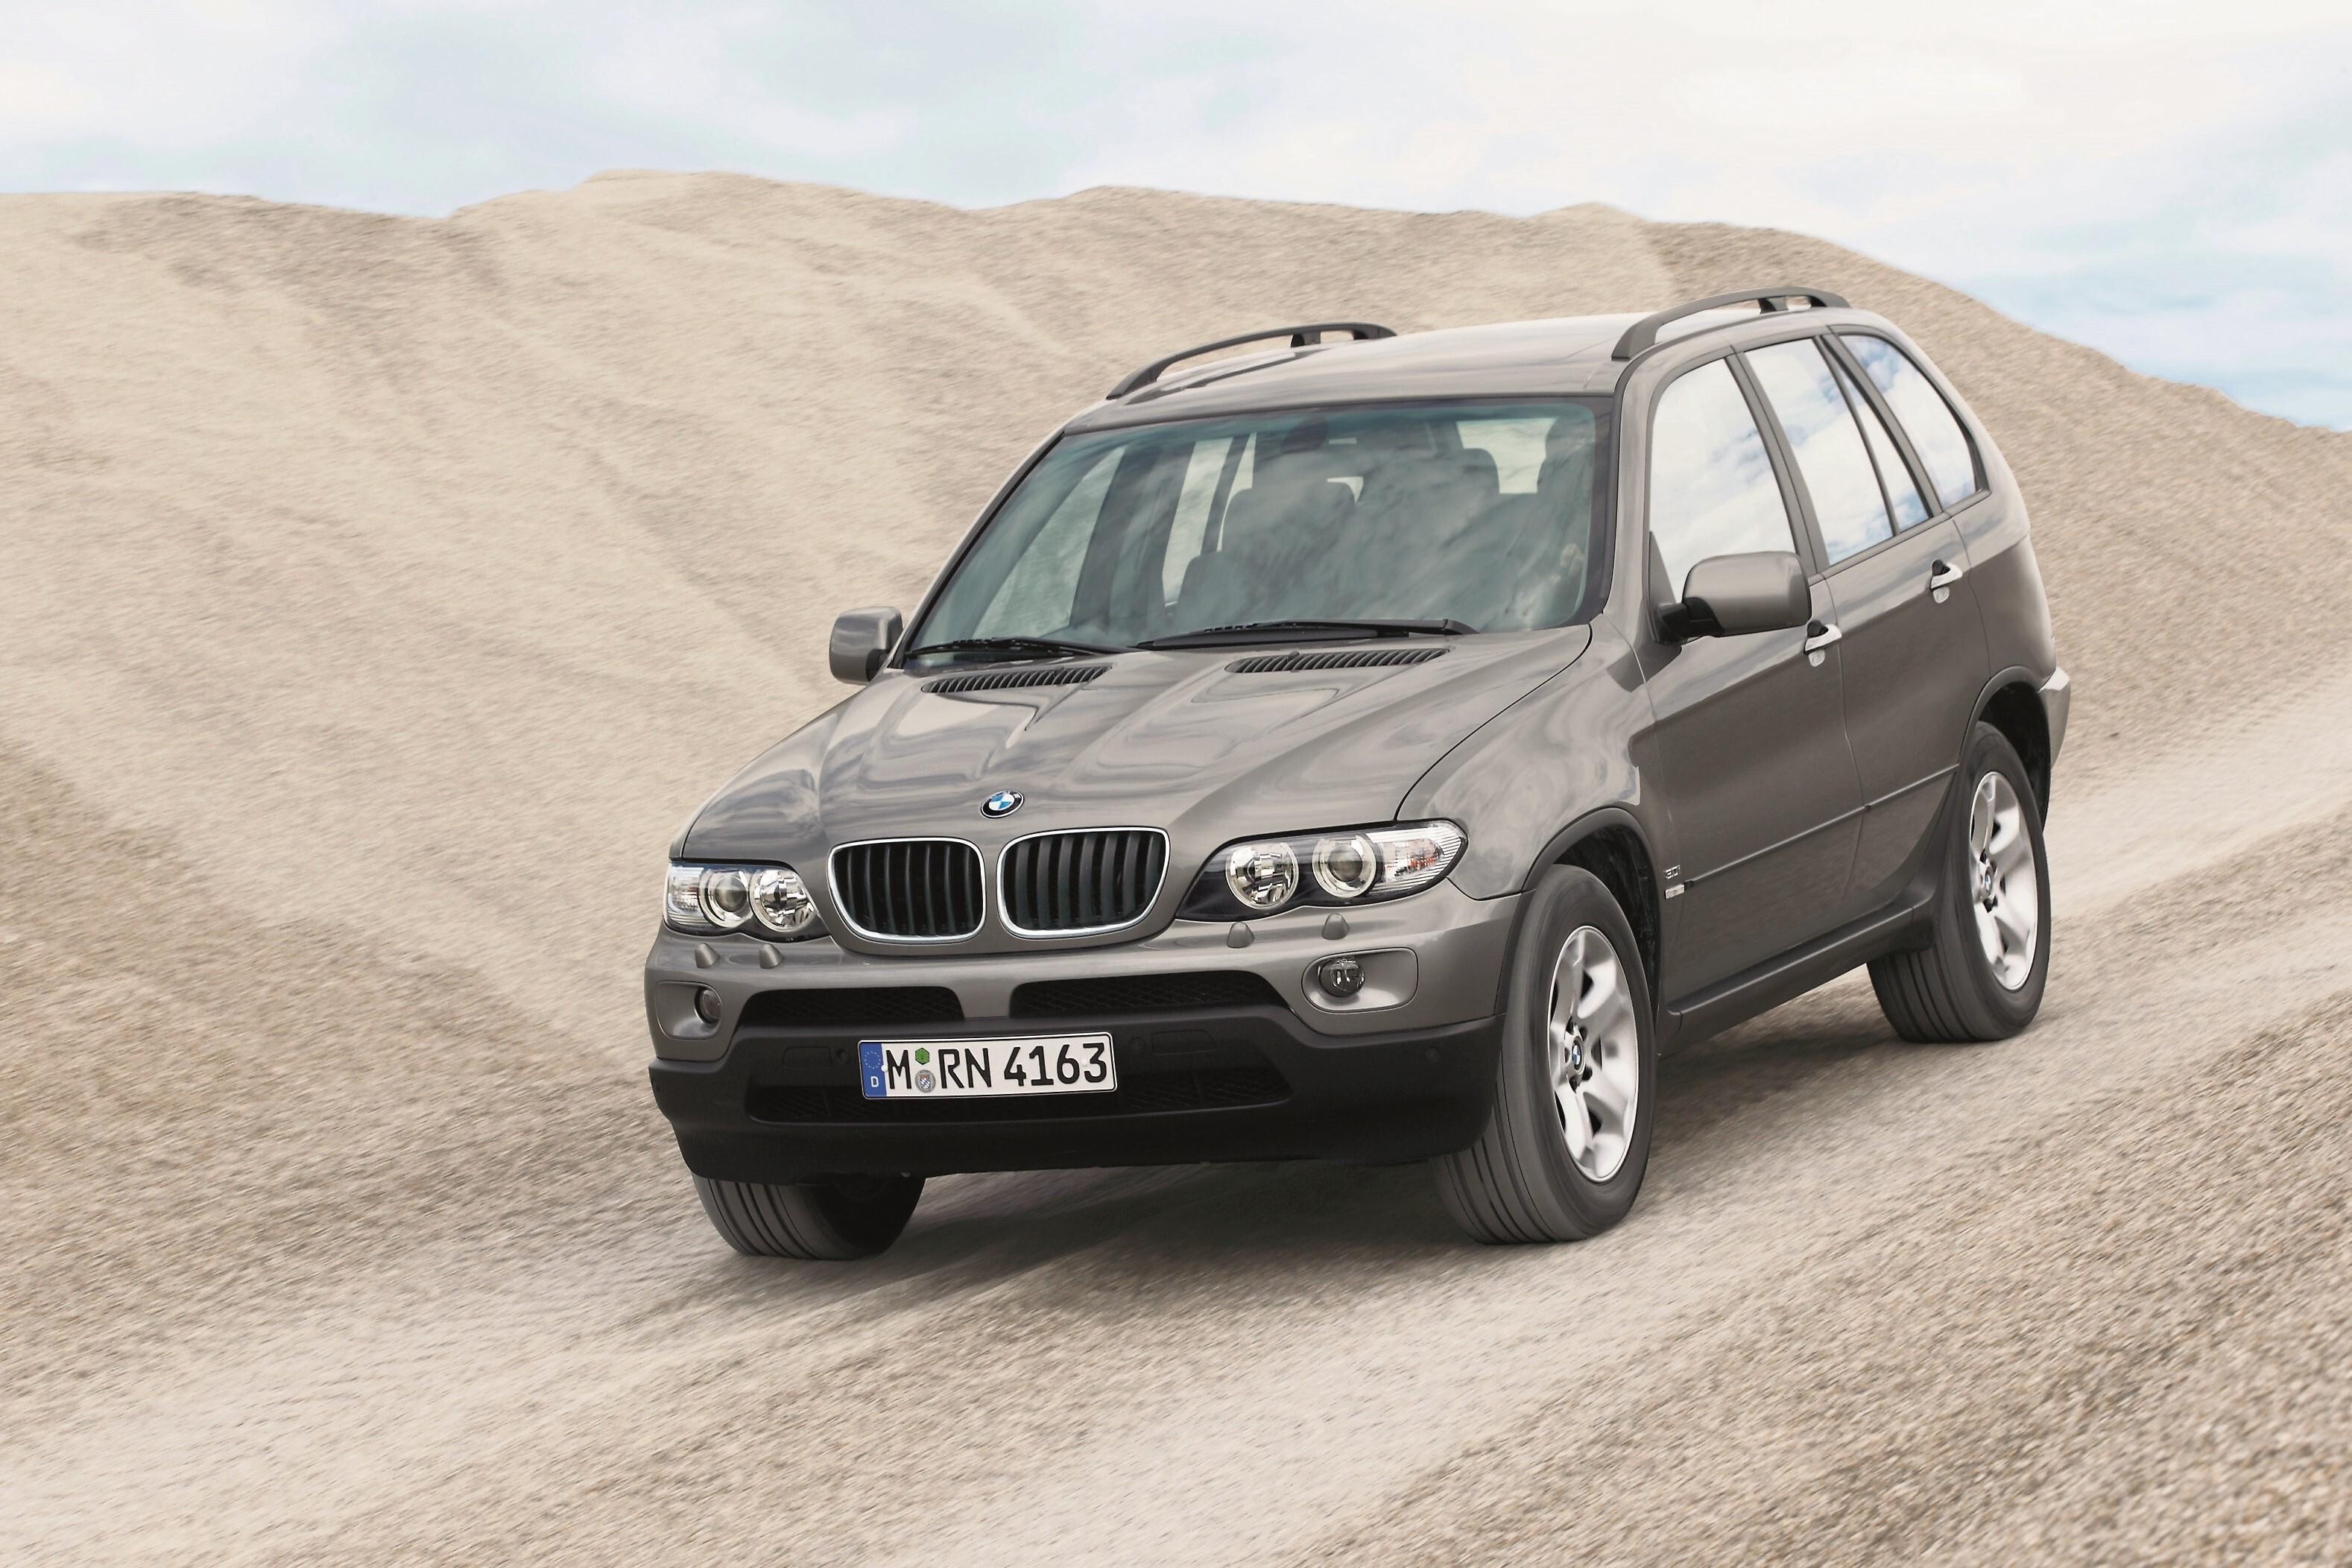 Бмв х5 е53 2005. БМВ x5 e53. BMW x5 e53 2004. BMW x5 e53 3.0. BMW x5 e53 Restyling.